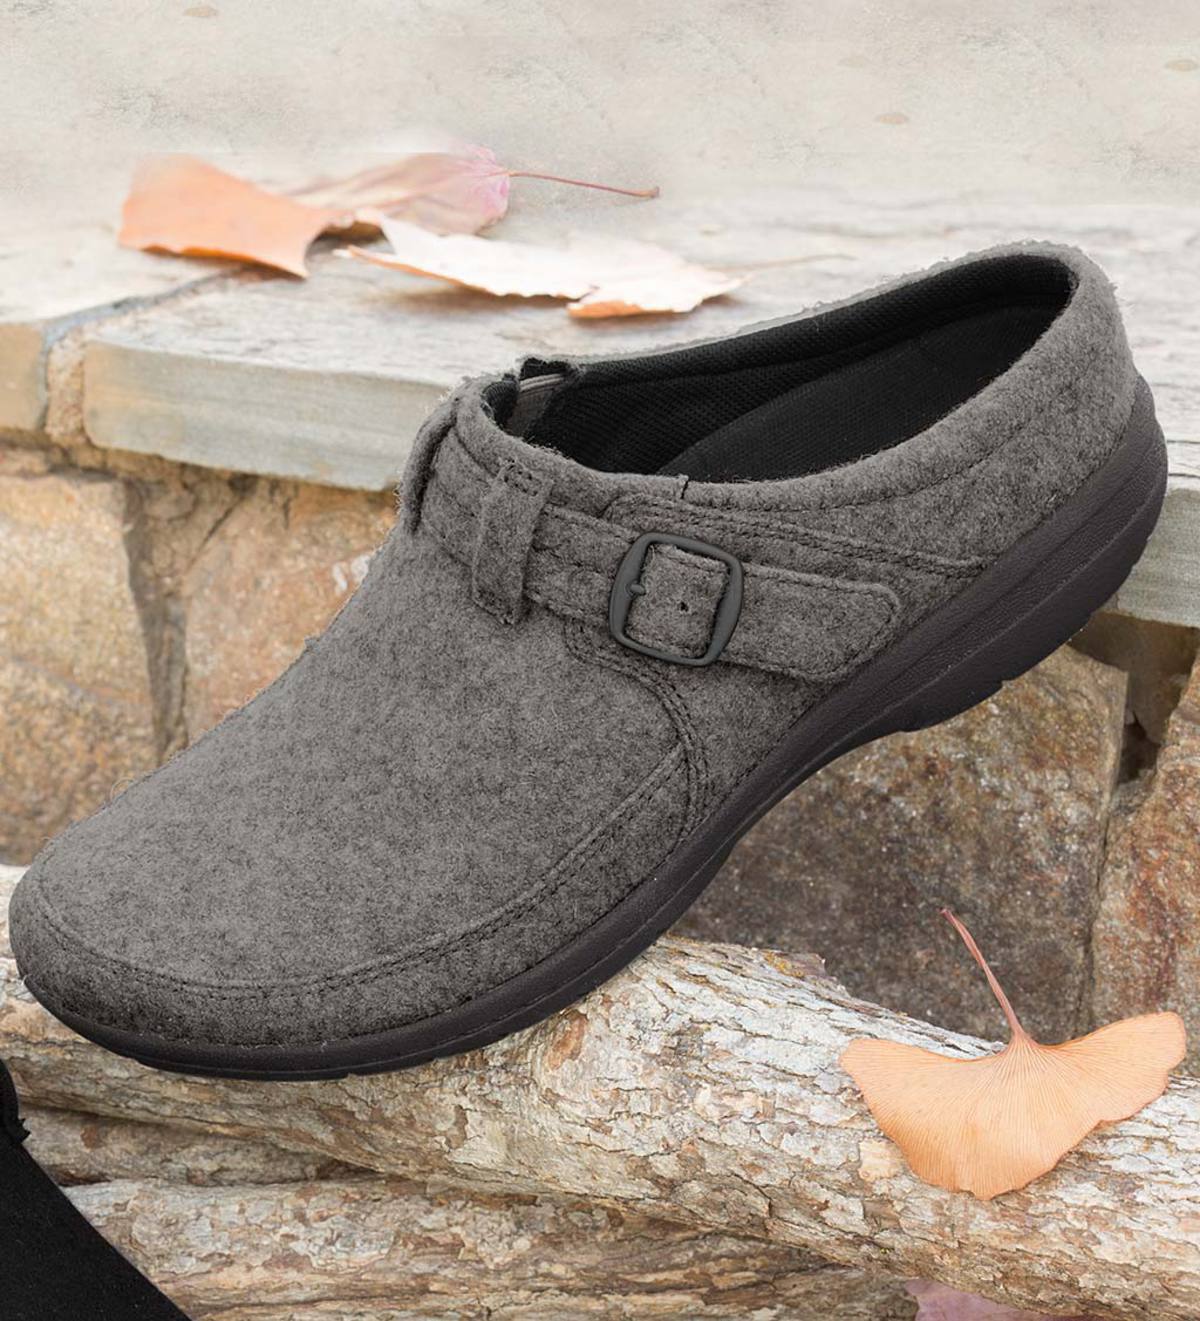 Kassie' Unisex Professional Shoes, Comfortable & Breathable